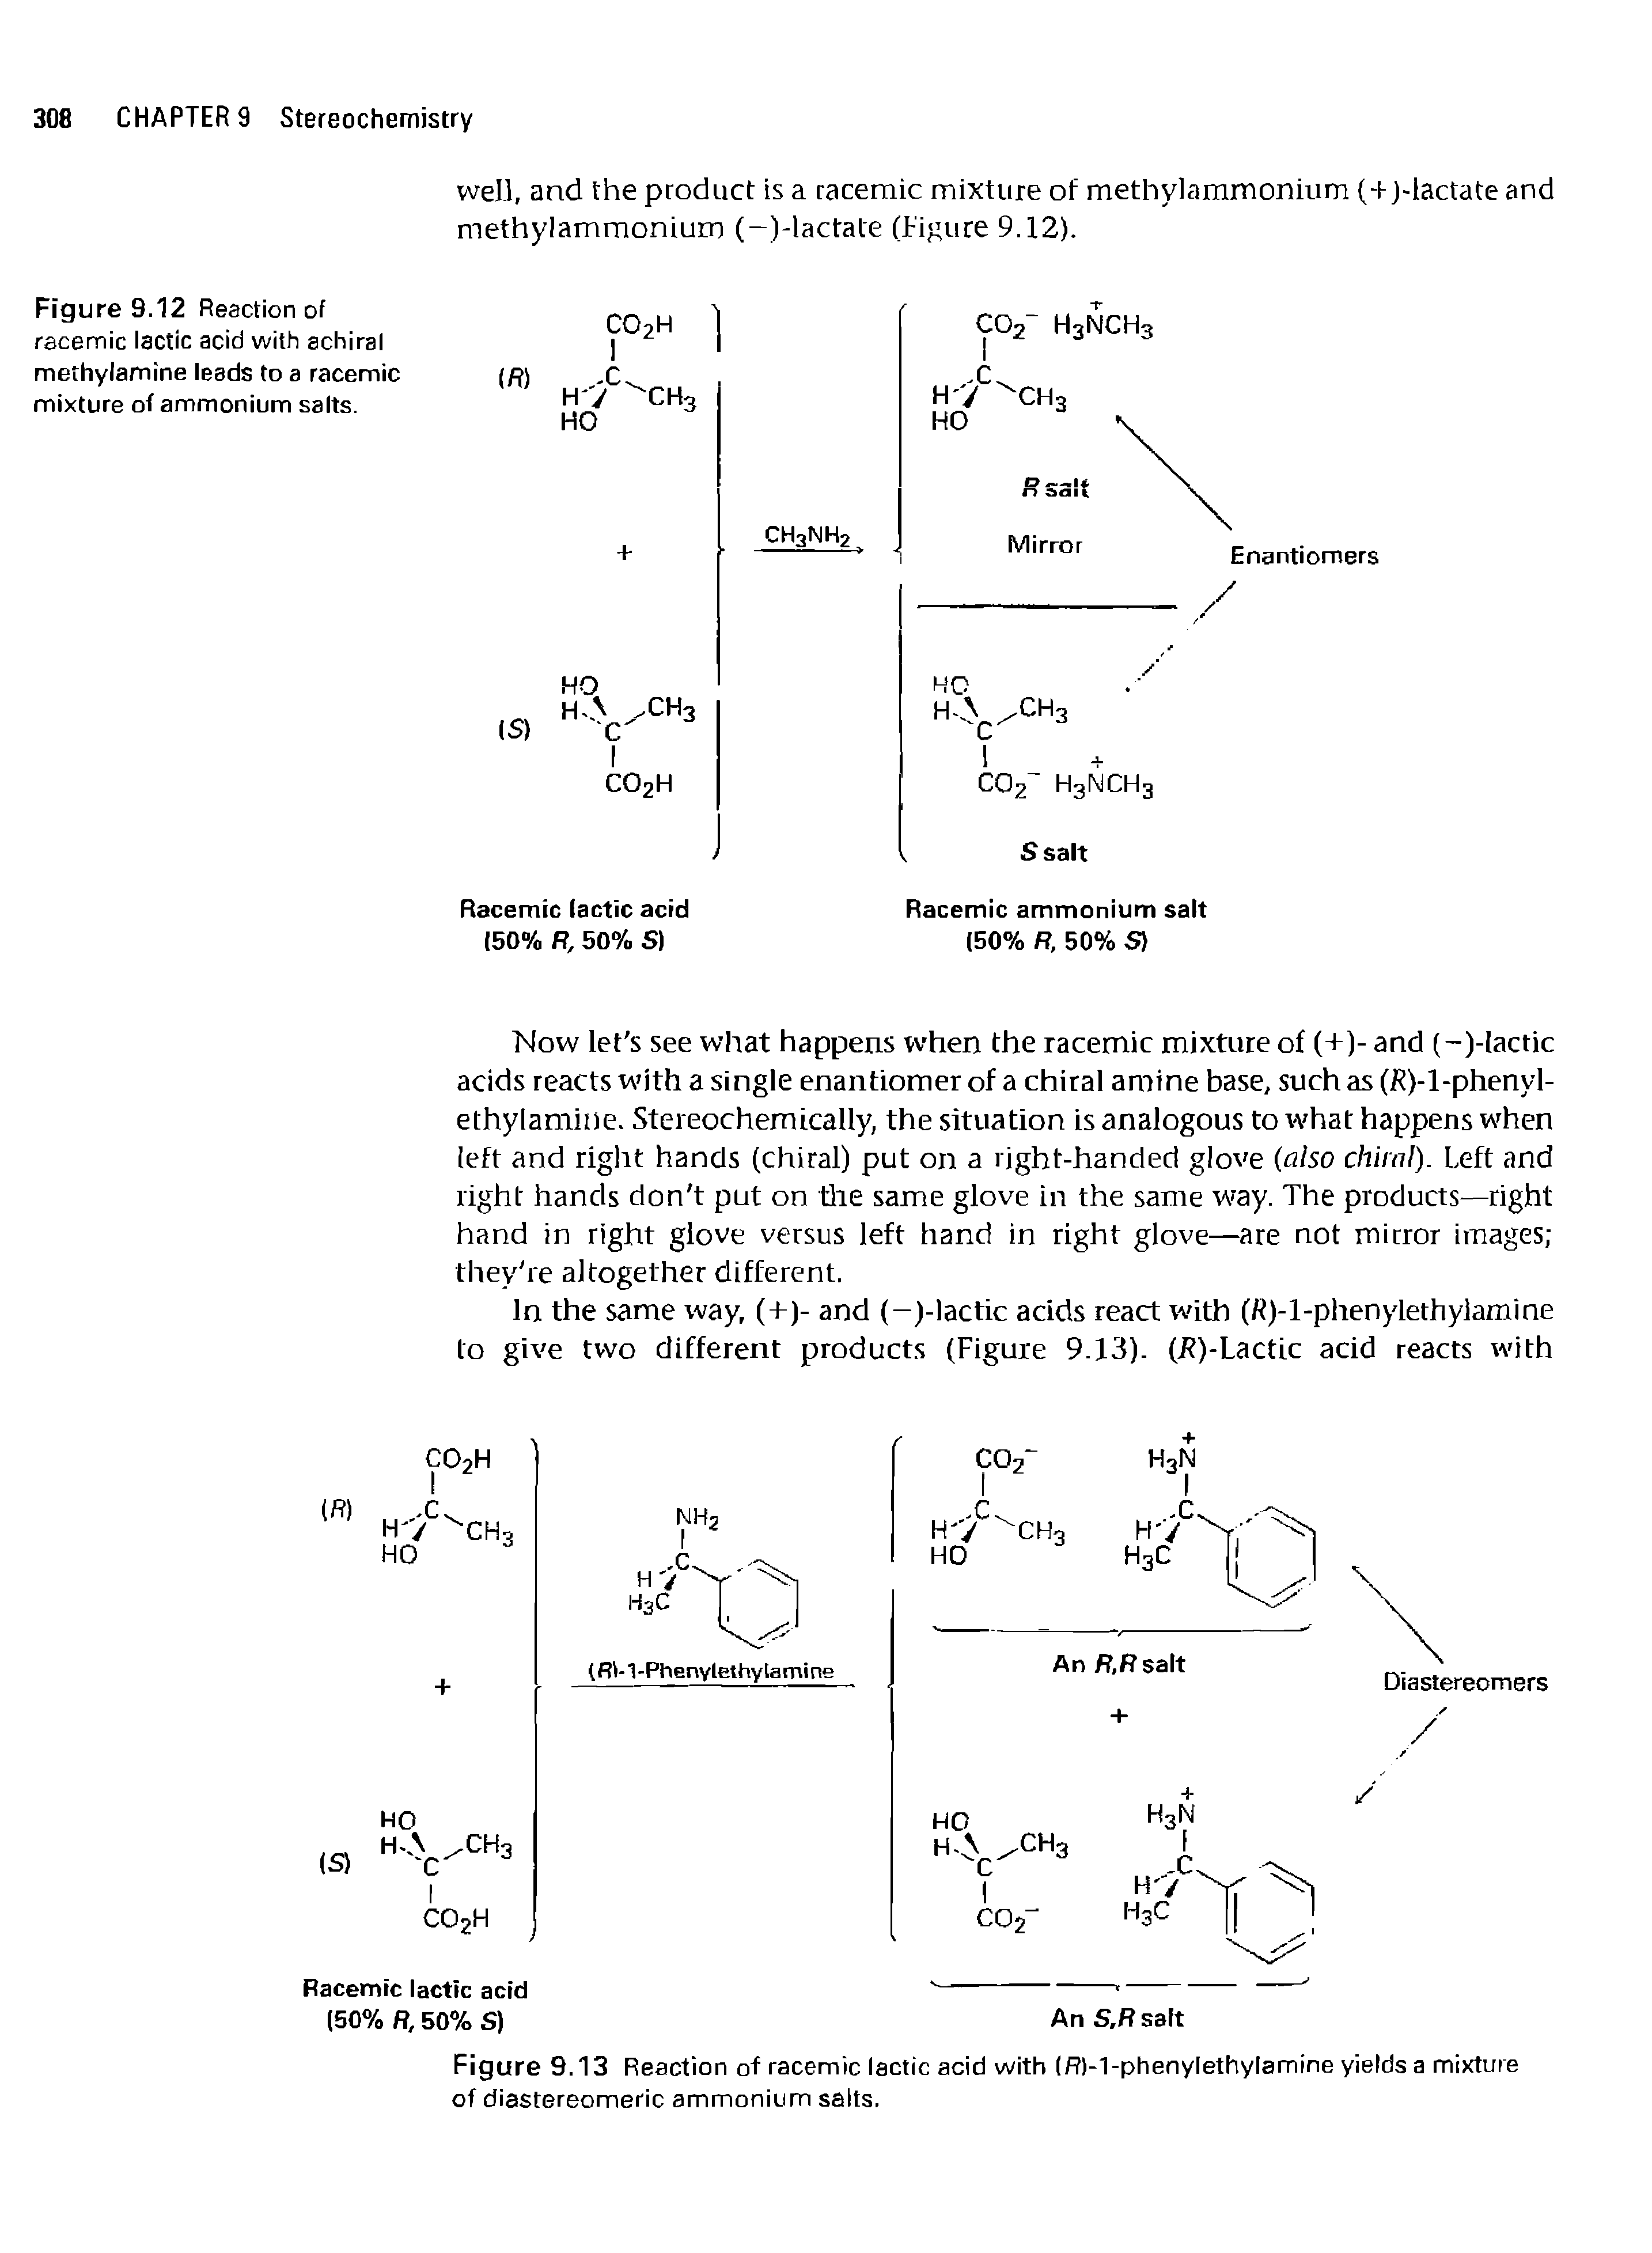 Figure 9.13 Reaction of racemic lactic acid with (RH-phenylethylamine yields a mixture of diastereomeric ammonium salts.